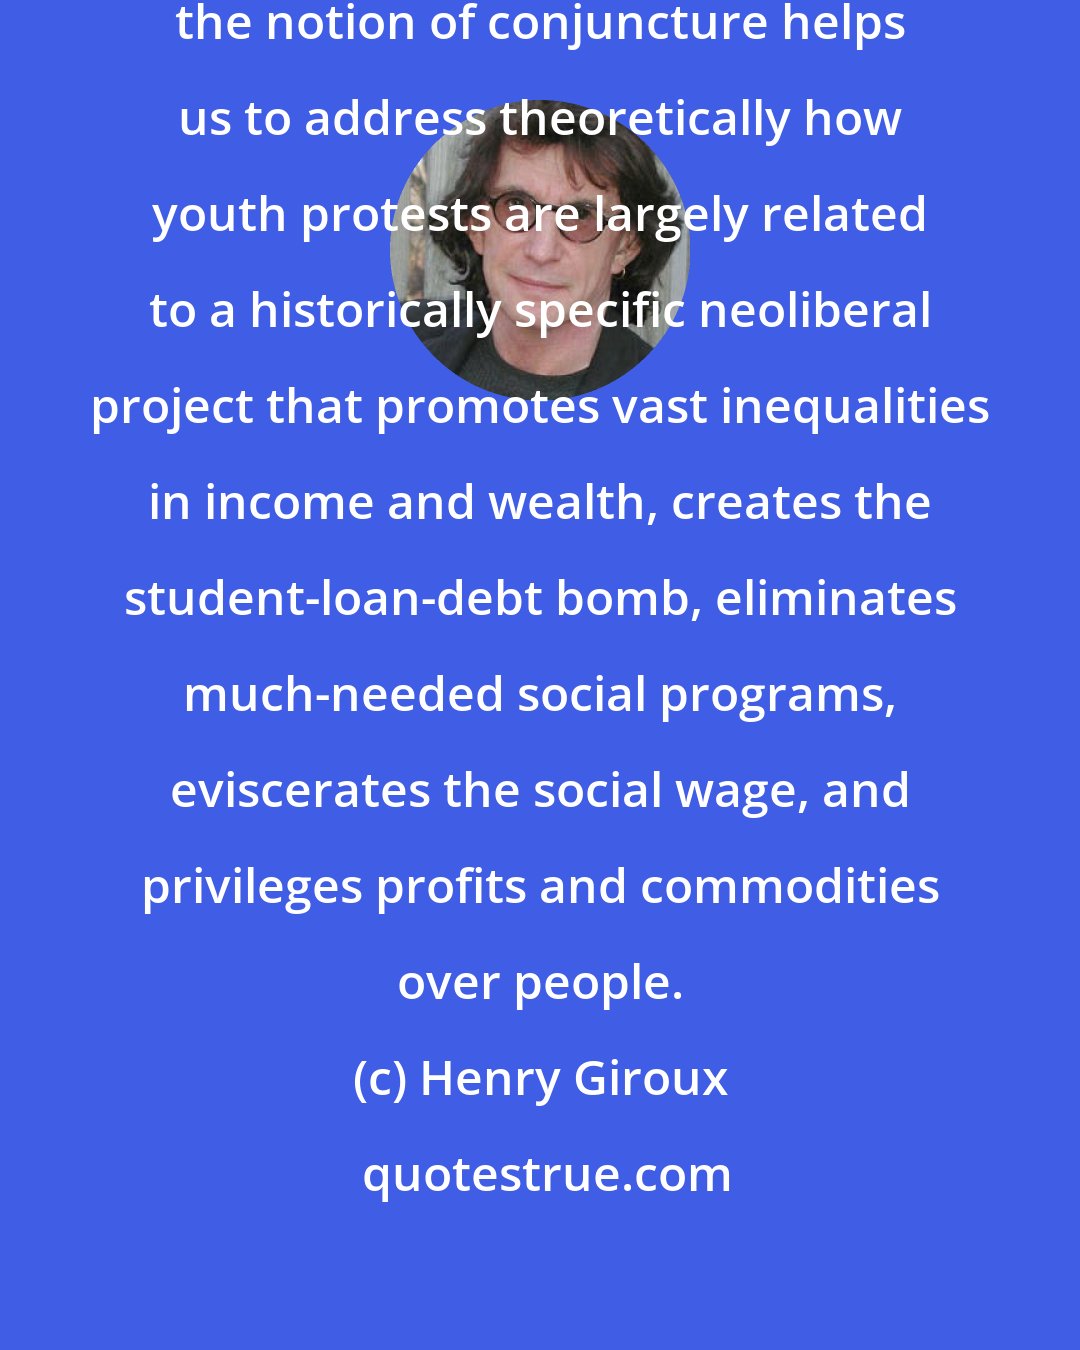 Henry Giroux: In this particular historical moment, the notion of conjuncture helps us to address theoretically how youth protests are largely related to a historically specific neoliberal project that promotes vast inequalities in income and wealth, creates the student-loan-debt bomb, eliminates much-needed social programs, eviscerates the social wage, and privileges profits and commodities over people.